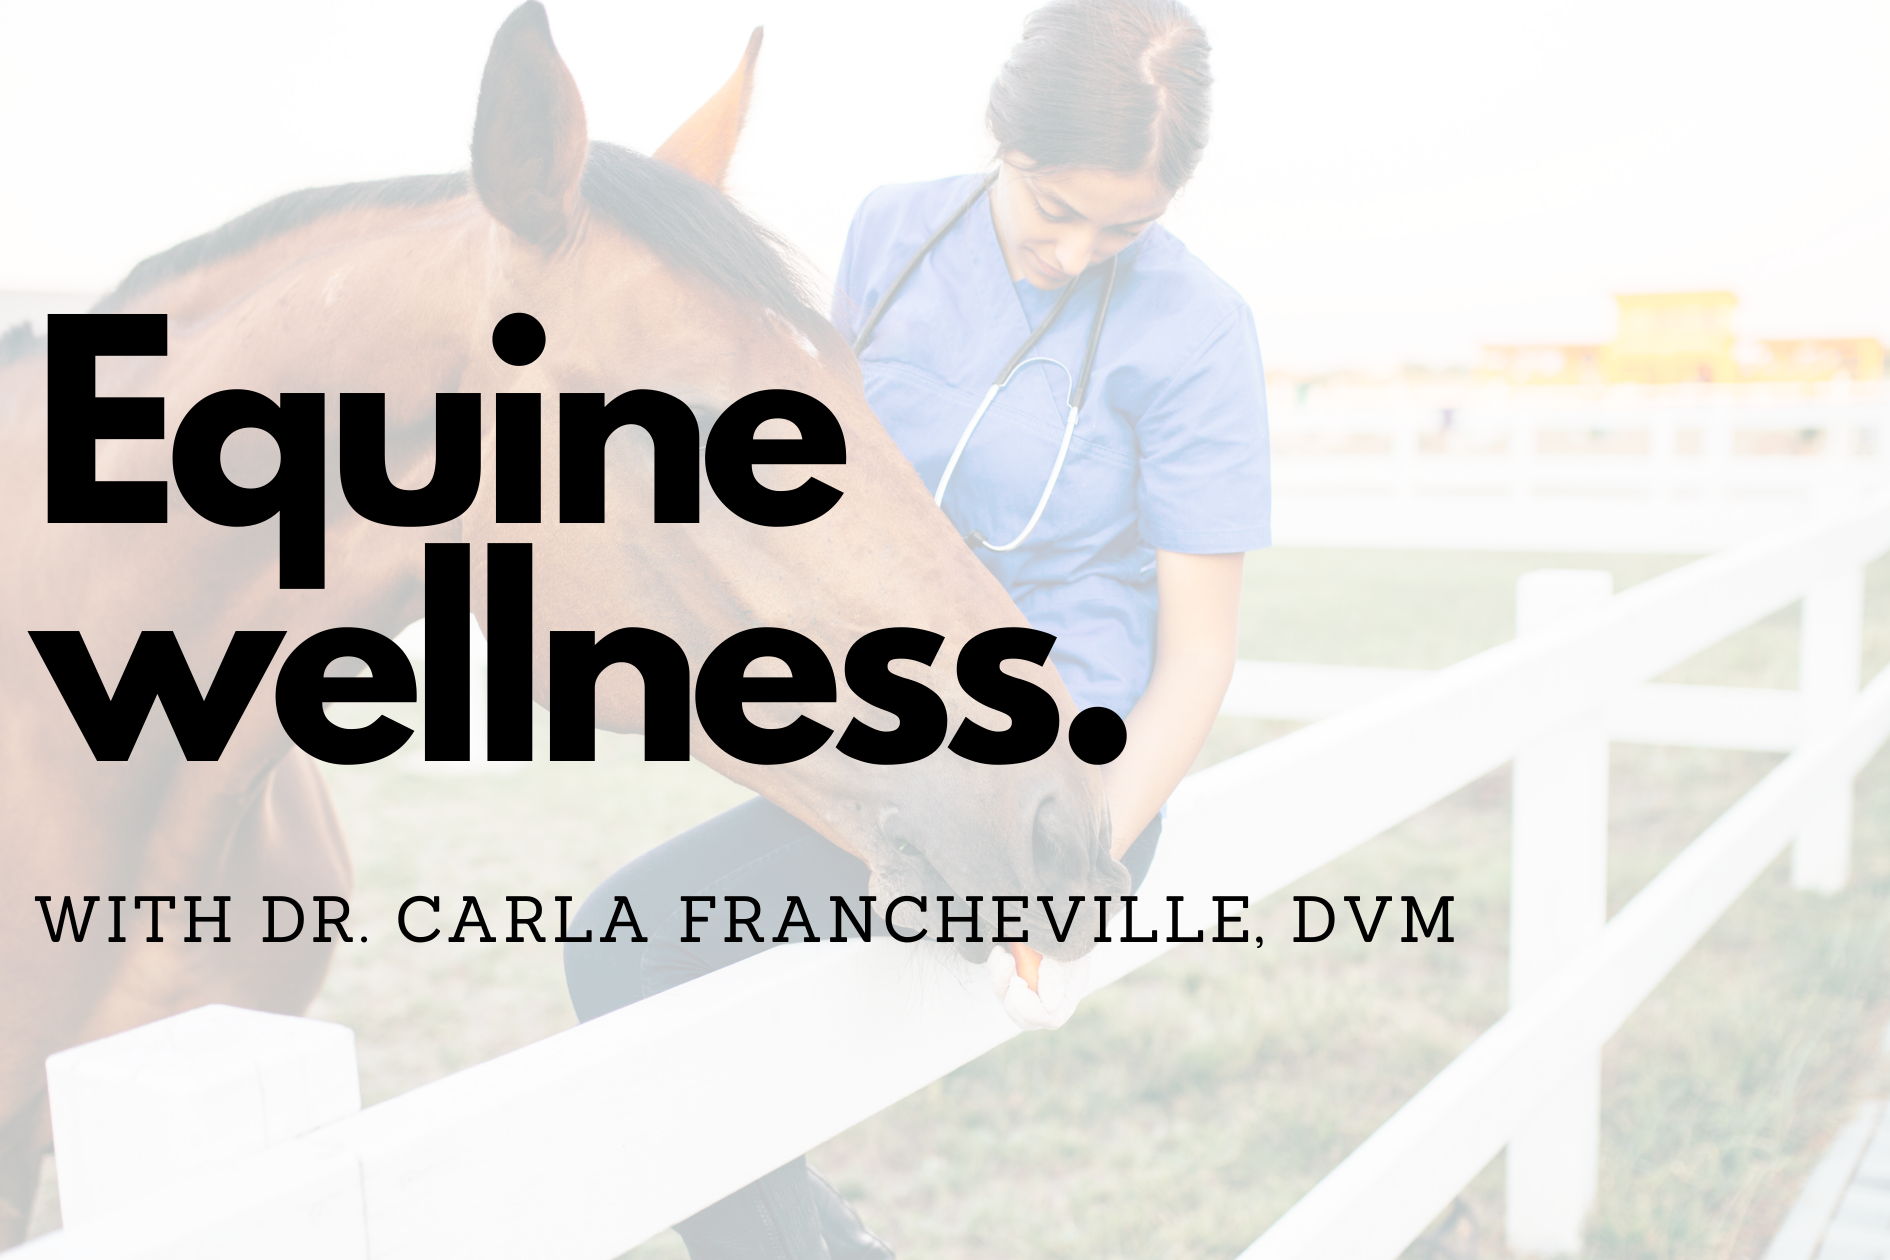 Equine Wellness with Dr. Carla Francheville, DVM